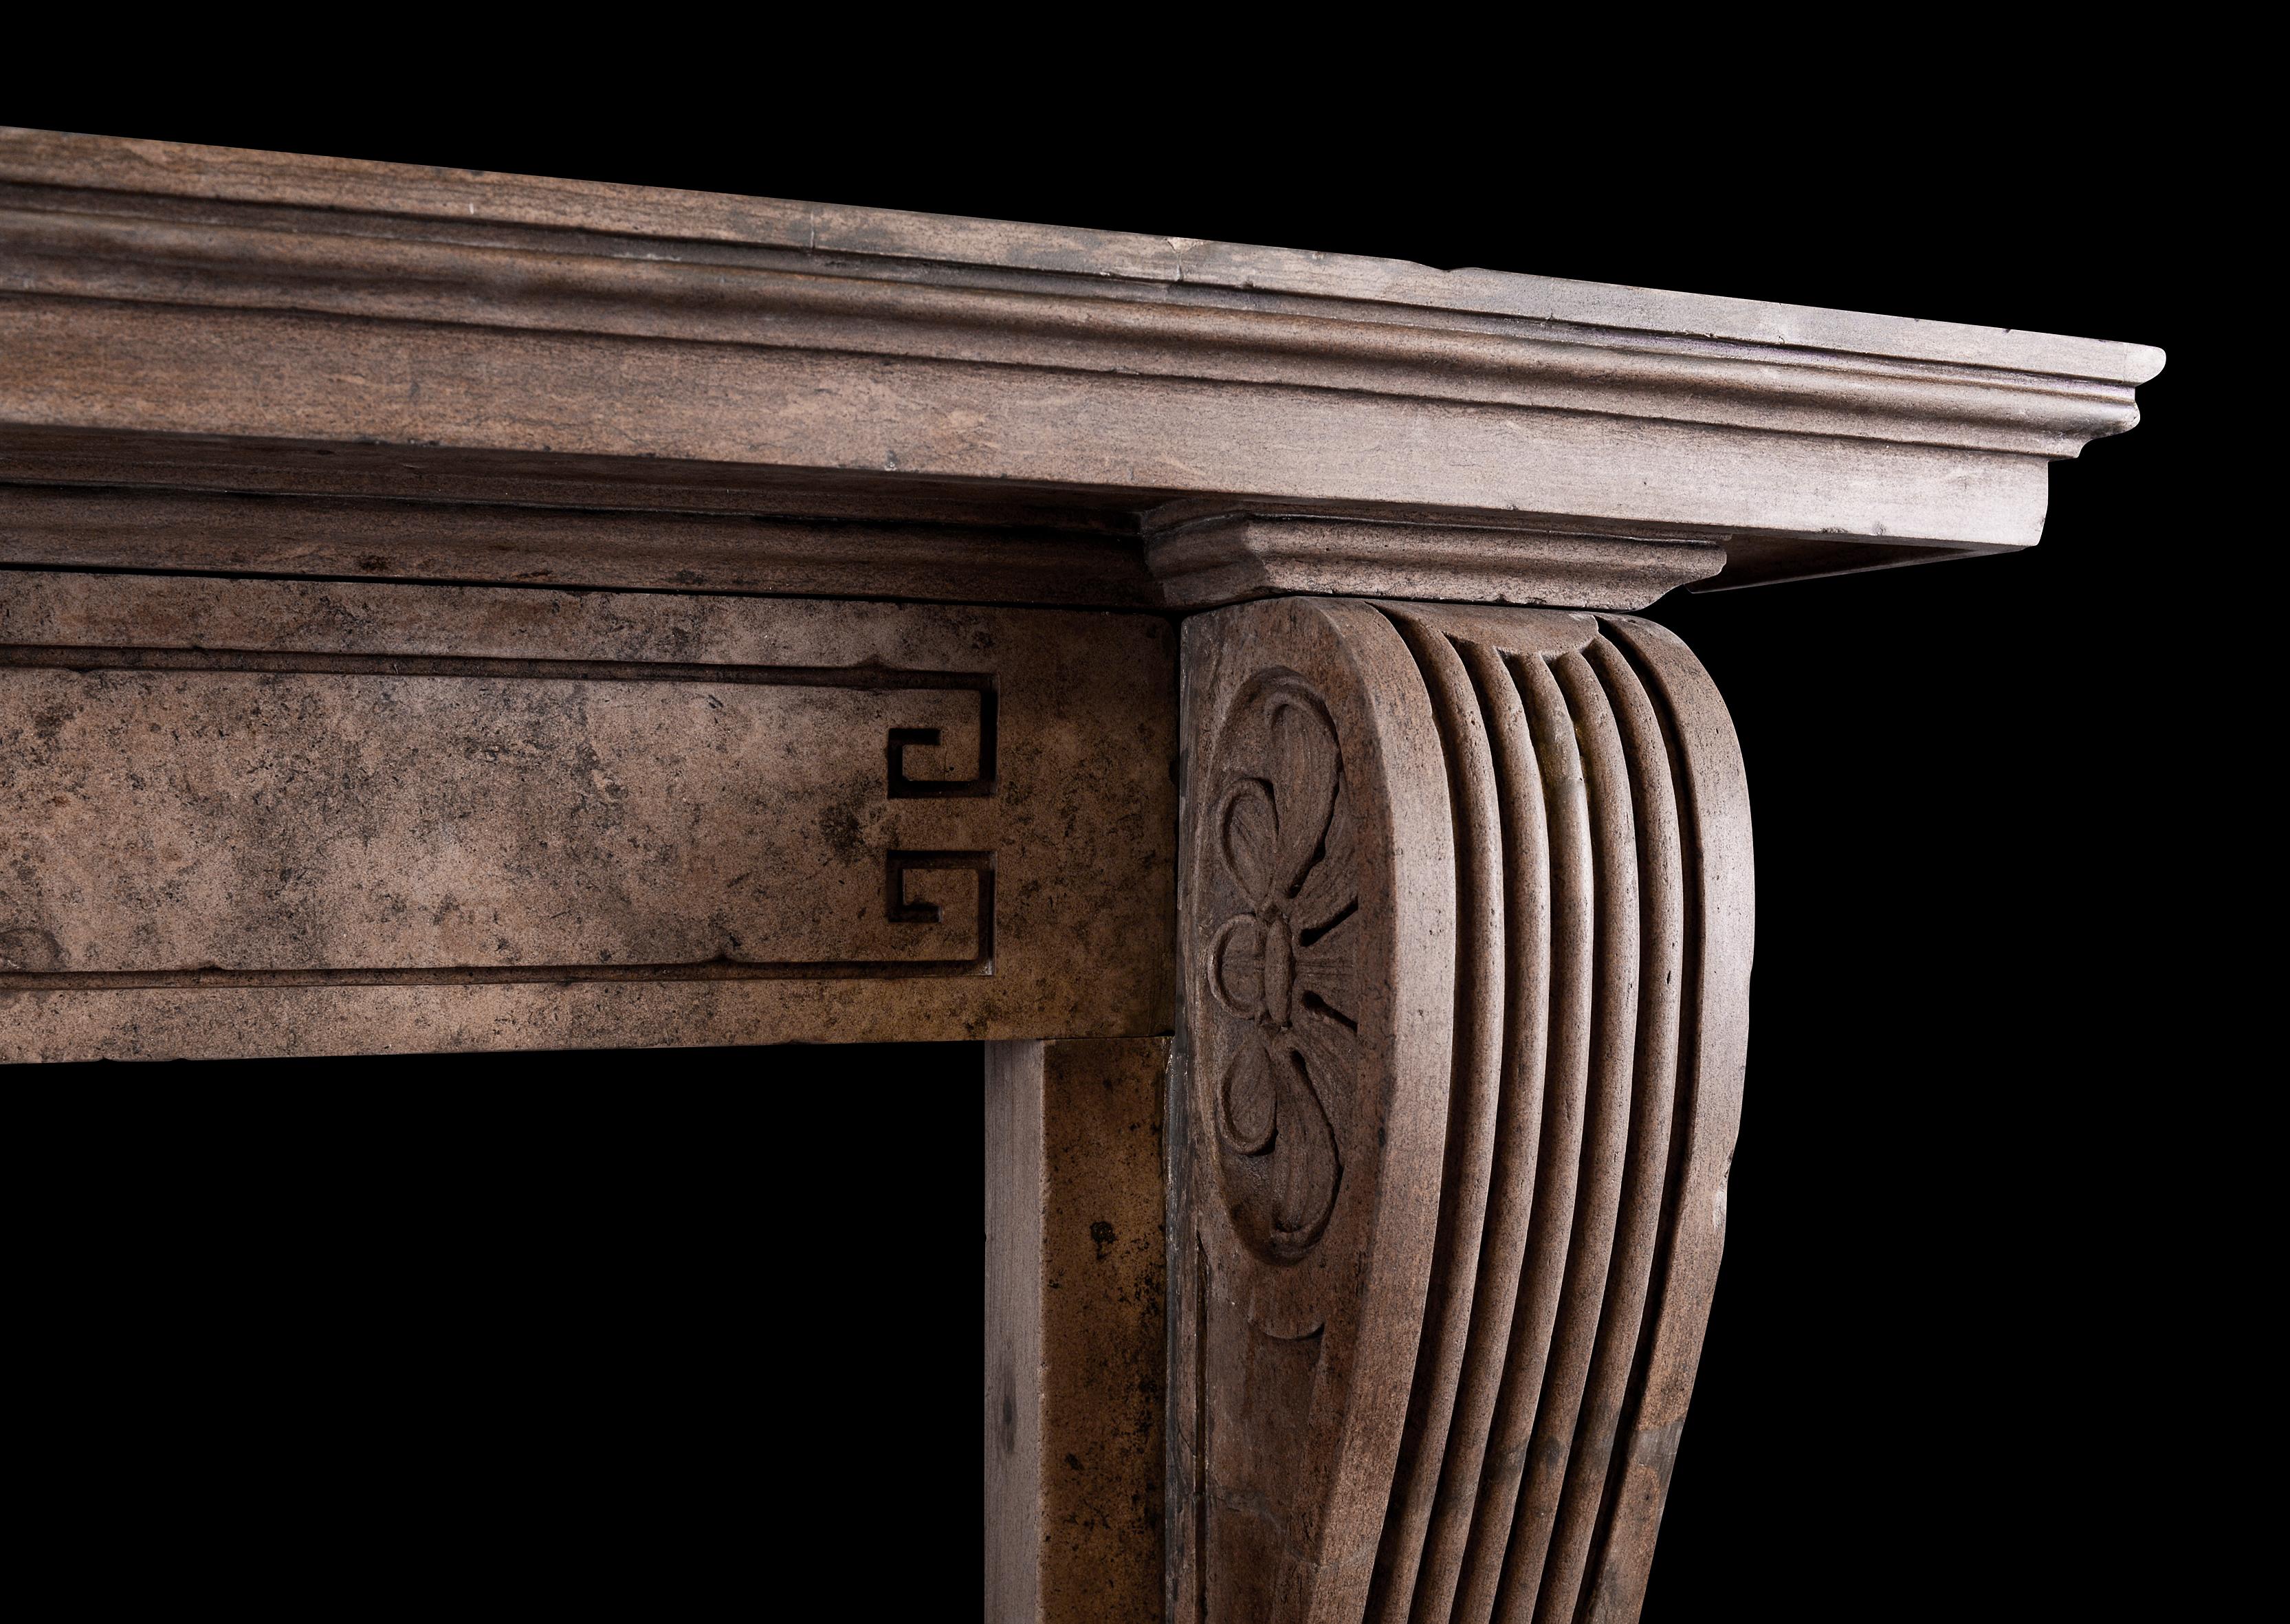 A large and impressive period Regency stone fireplace. The shaped, reeded jambs with carved brackets to top and roundels to plinths. The frieze with Greek key pattern, surmounted by moulded shelf. English, circa 1820.

Sizes:
Shelf width: 2127 mm /